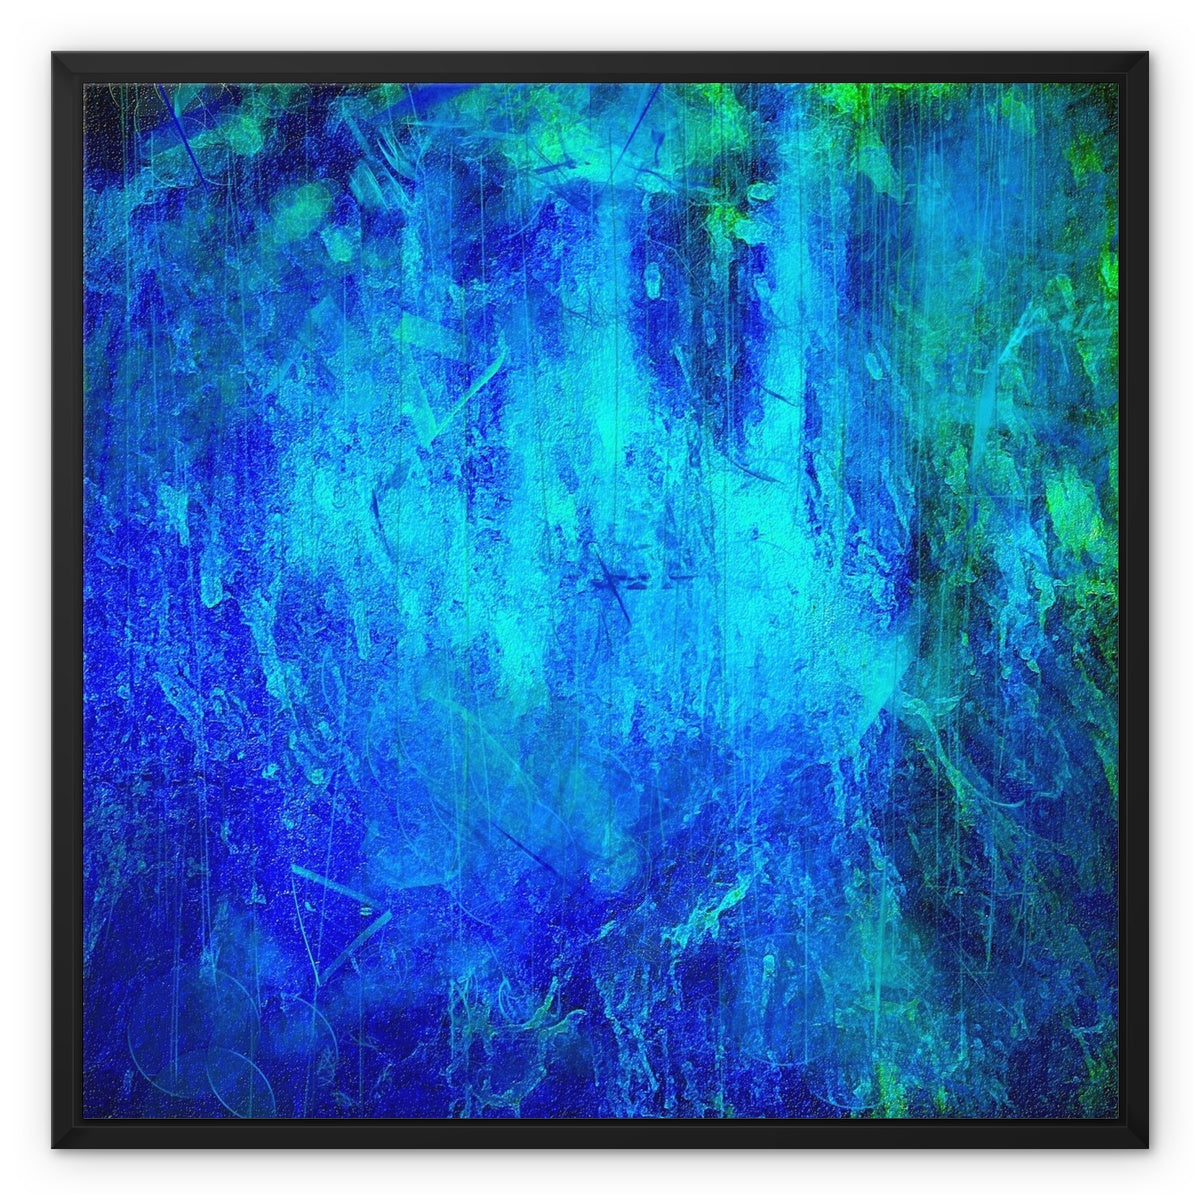 The Waterfall Abstract Painting | Framed Canvas From Scotland-Floating Framed Canvas Prints-Abstract & Impressionistic Art Gallery-24"x24"-Paintings, Prints, Homeware, Art Gifts From Scotland By Scottish Artist Kevin Hunter